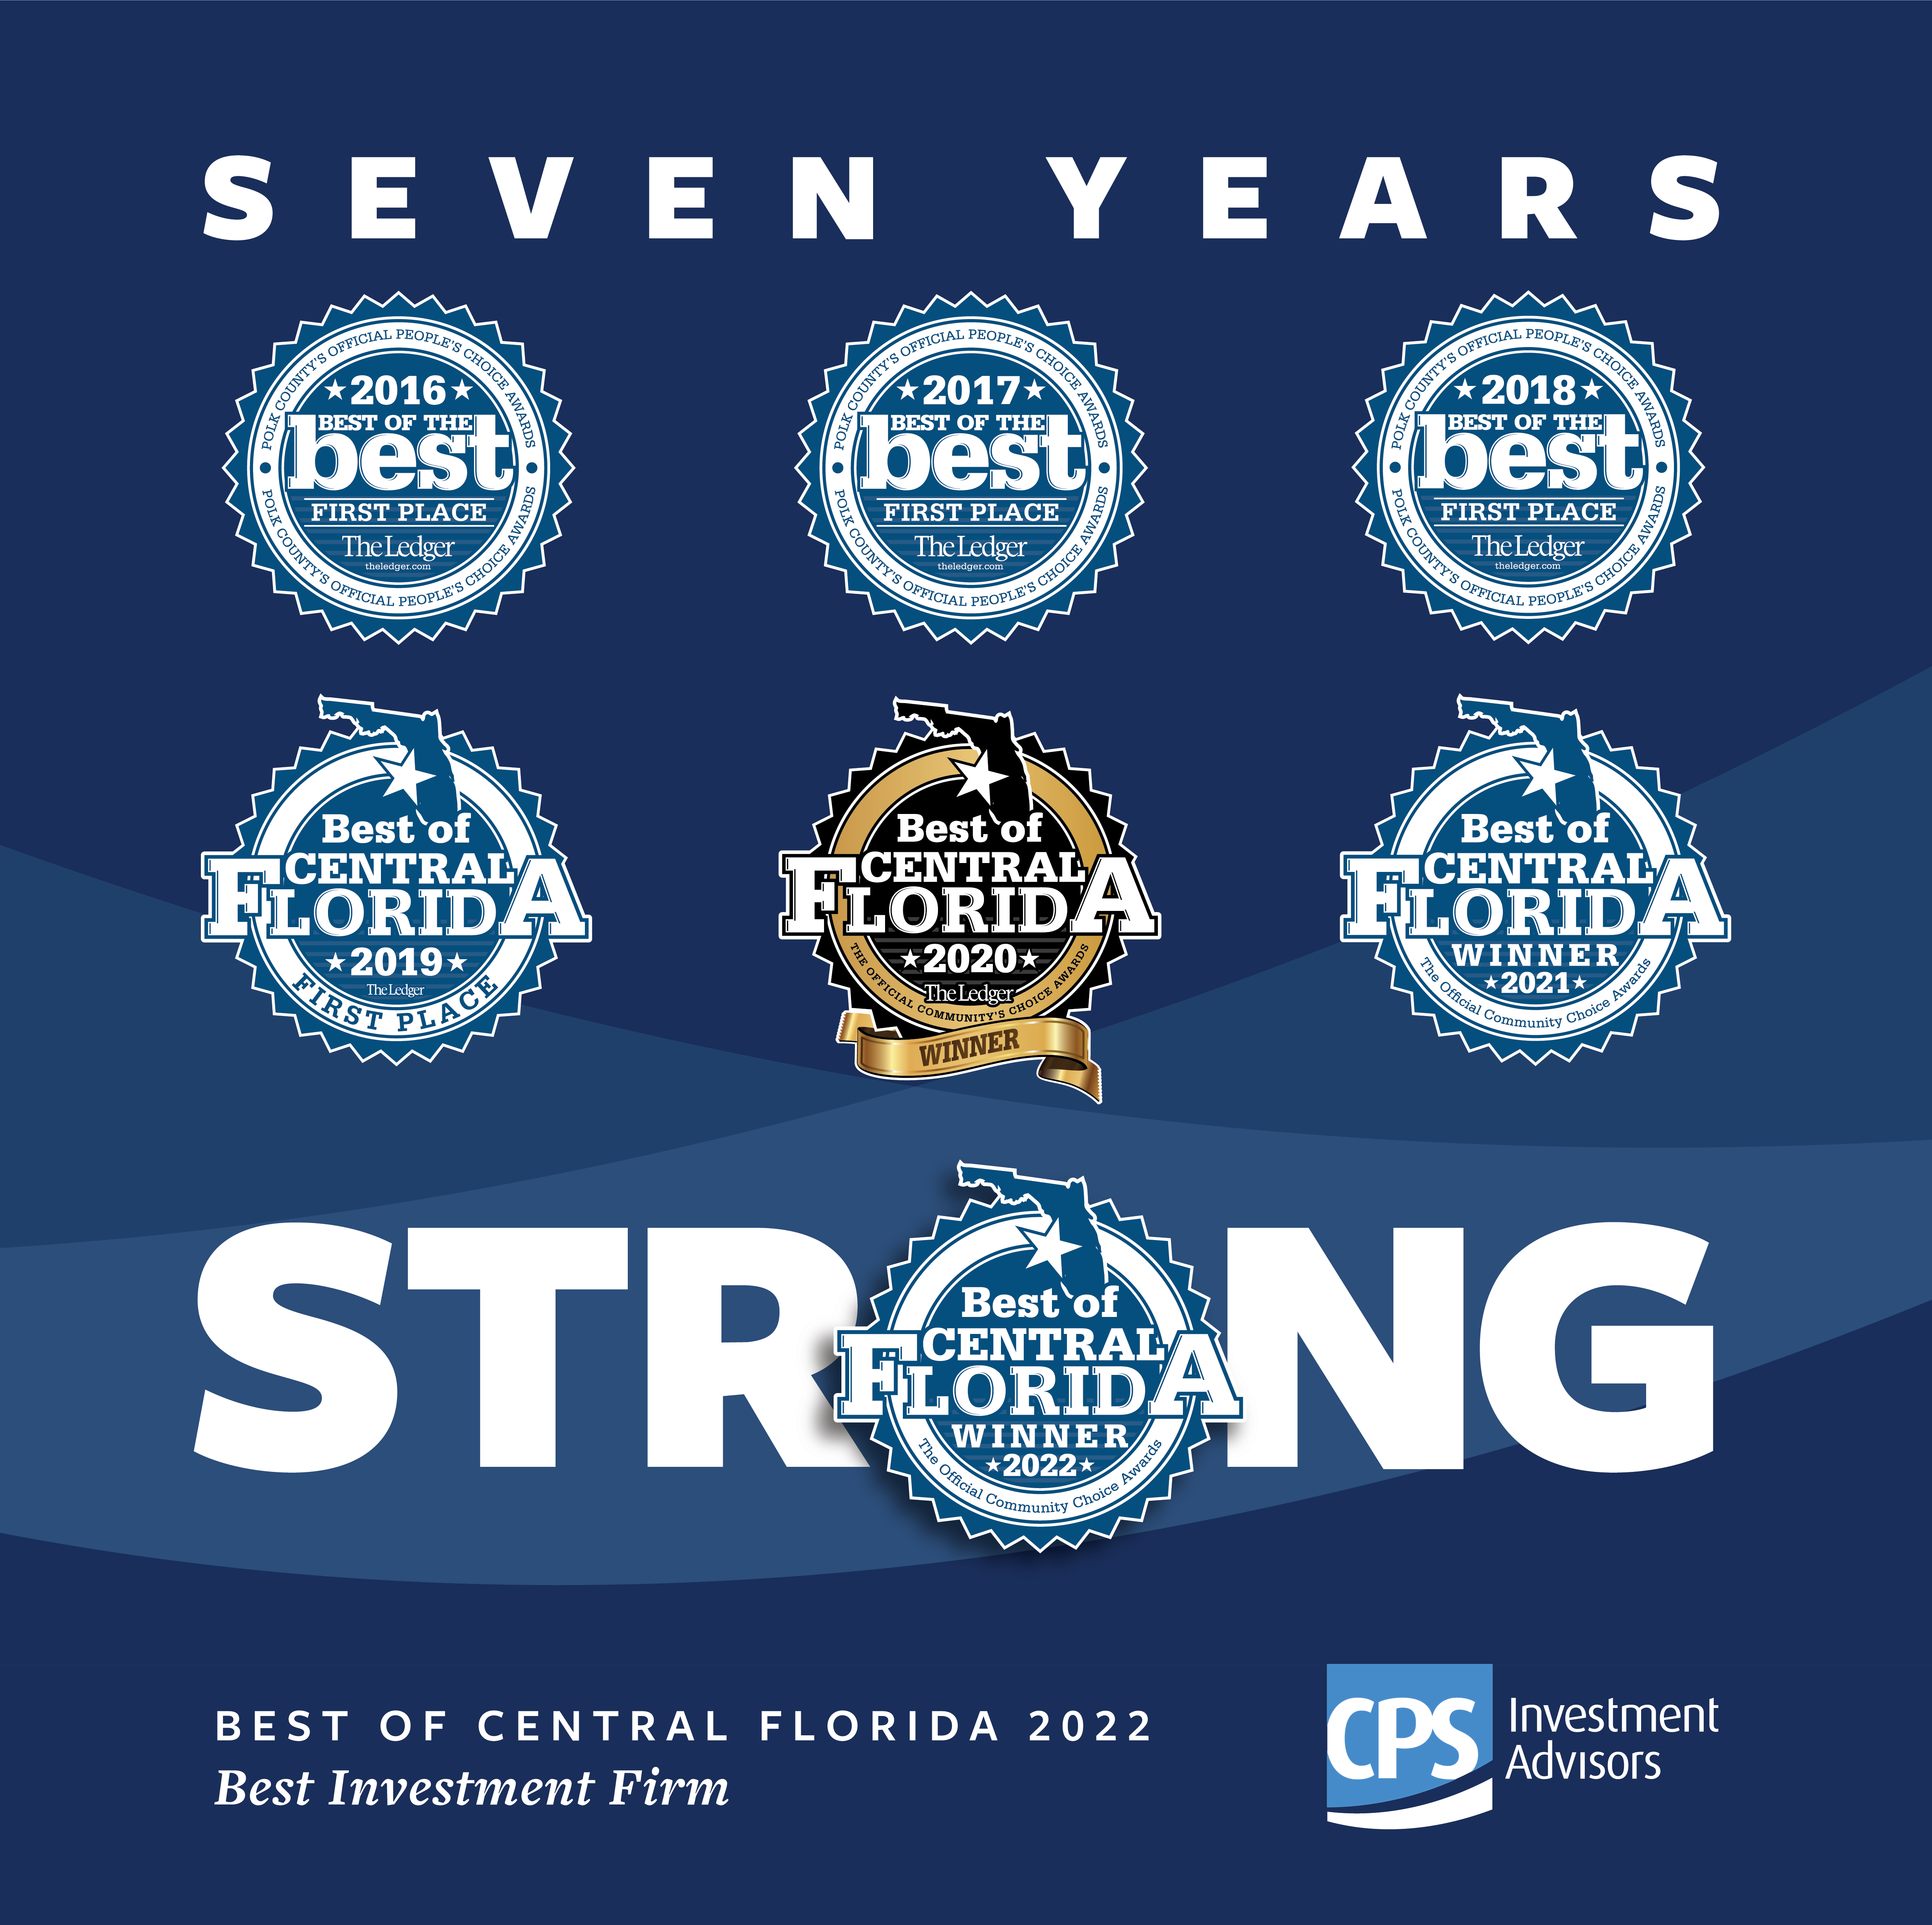 CPS is Voted Best Investment Firm for Best of Central Florida 2022